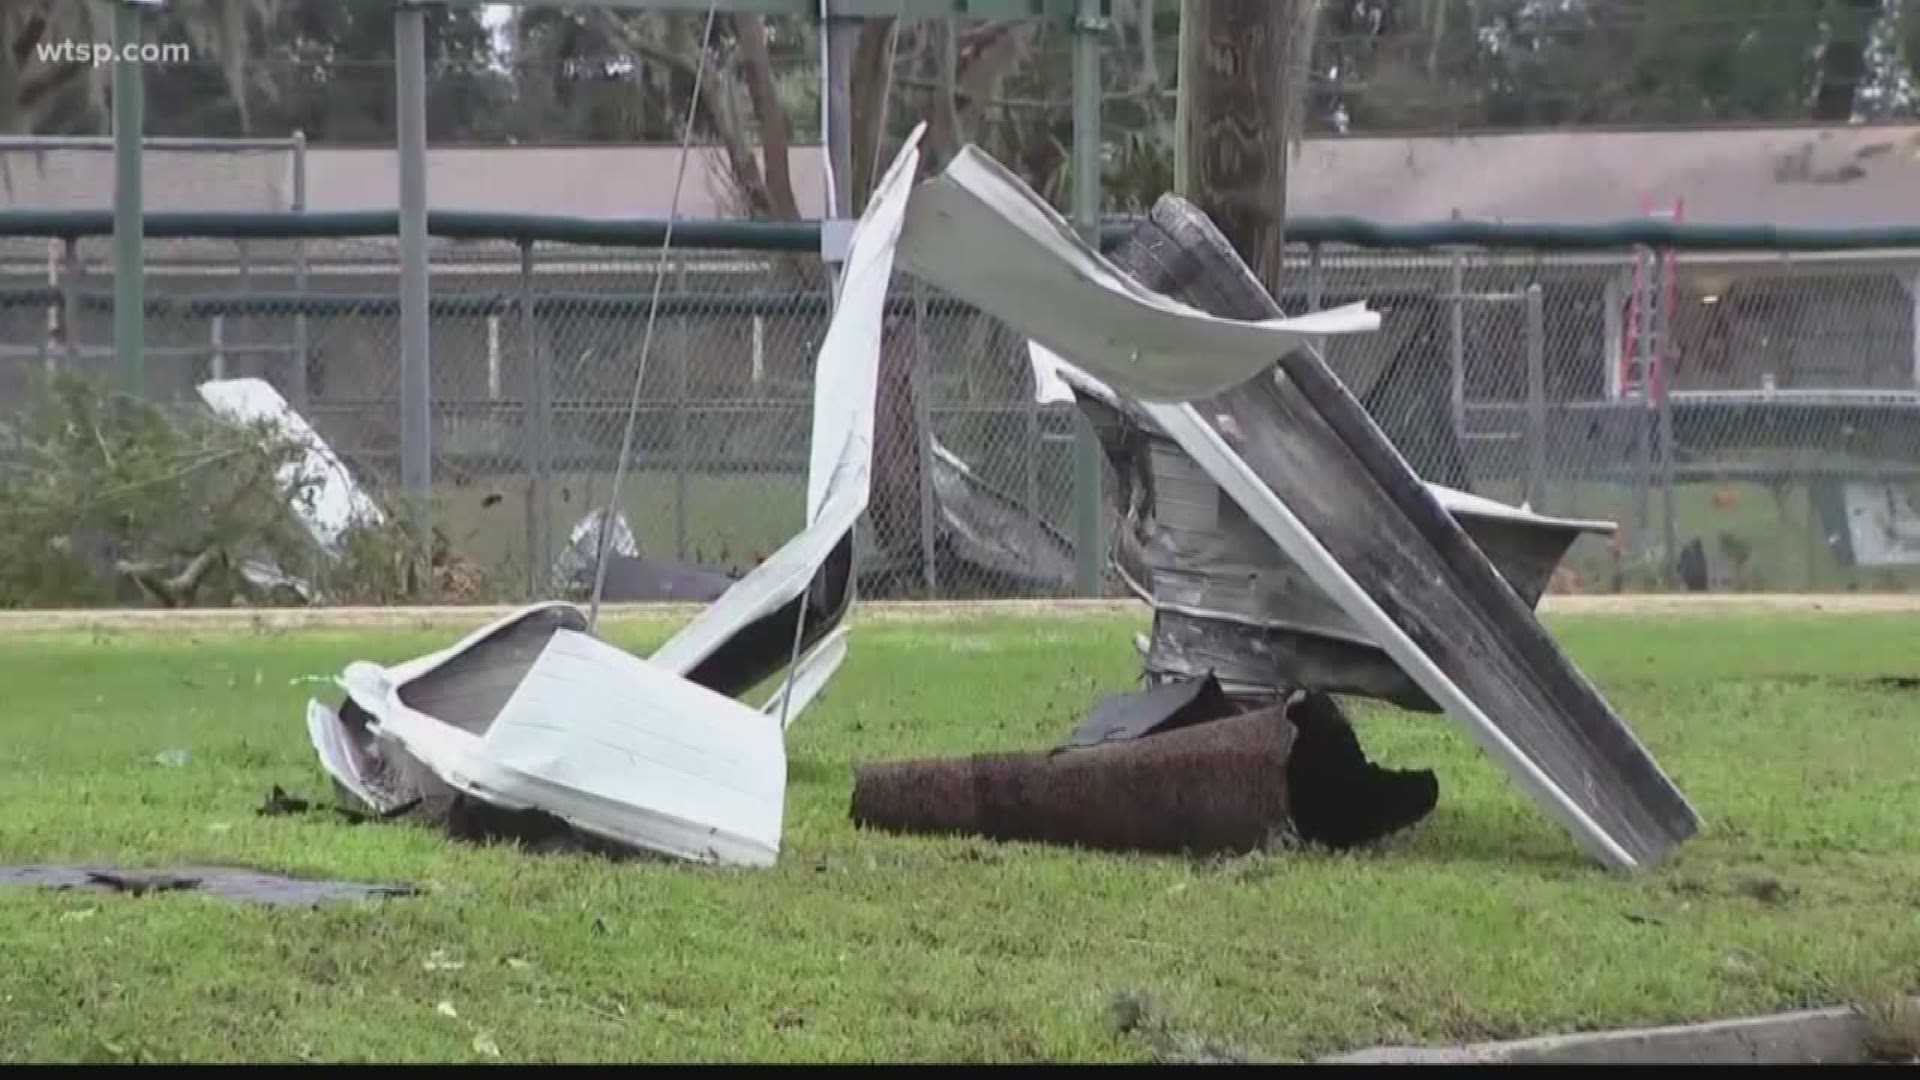 The National Weather Service has confirmed an EF-0 tornado touched down on Saturday, Jan. 4, in Okahumpka, Fla.